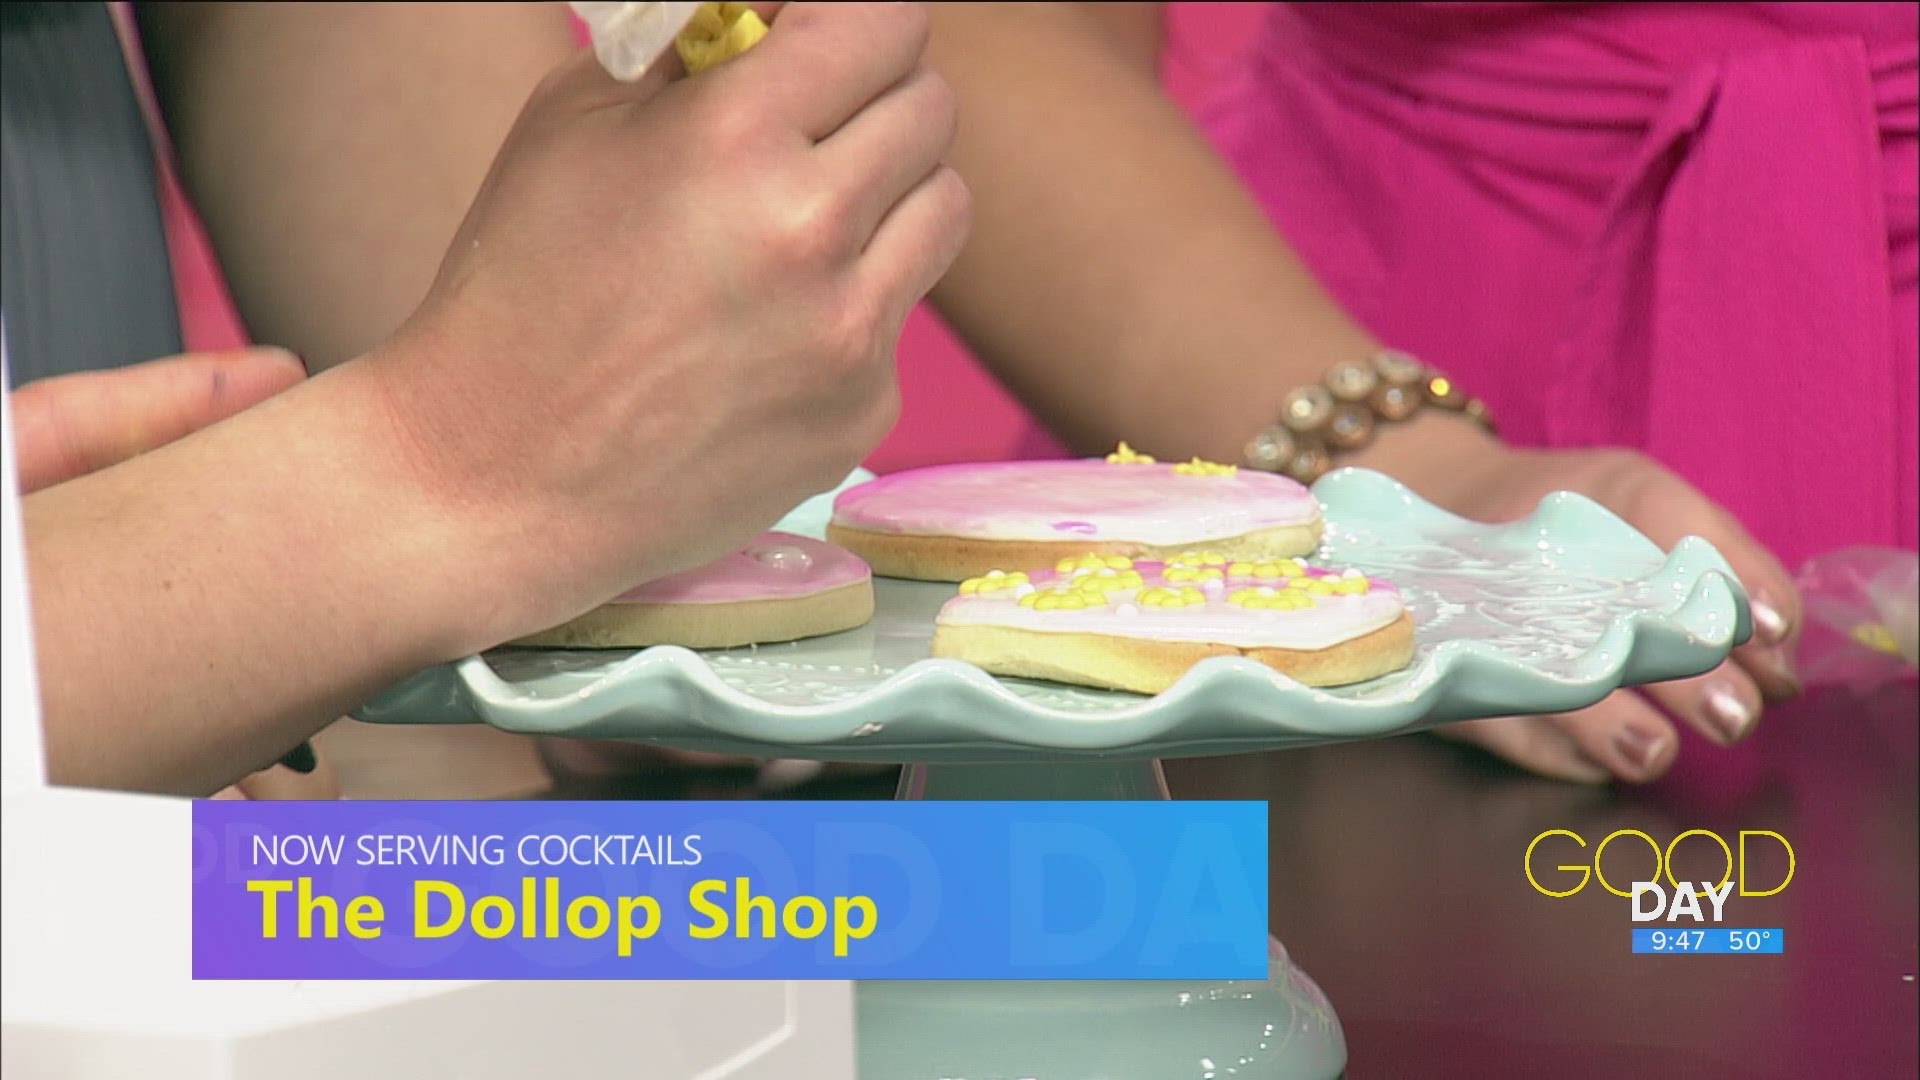 Claire Cameron-Ruetz from the Dollop Shop, located in the Cricket West Shopping Center, joins Good Day to talk about the bakery and cafe.